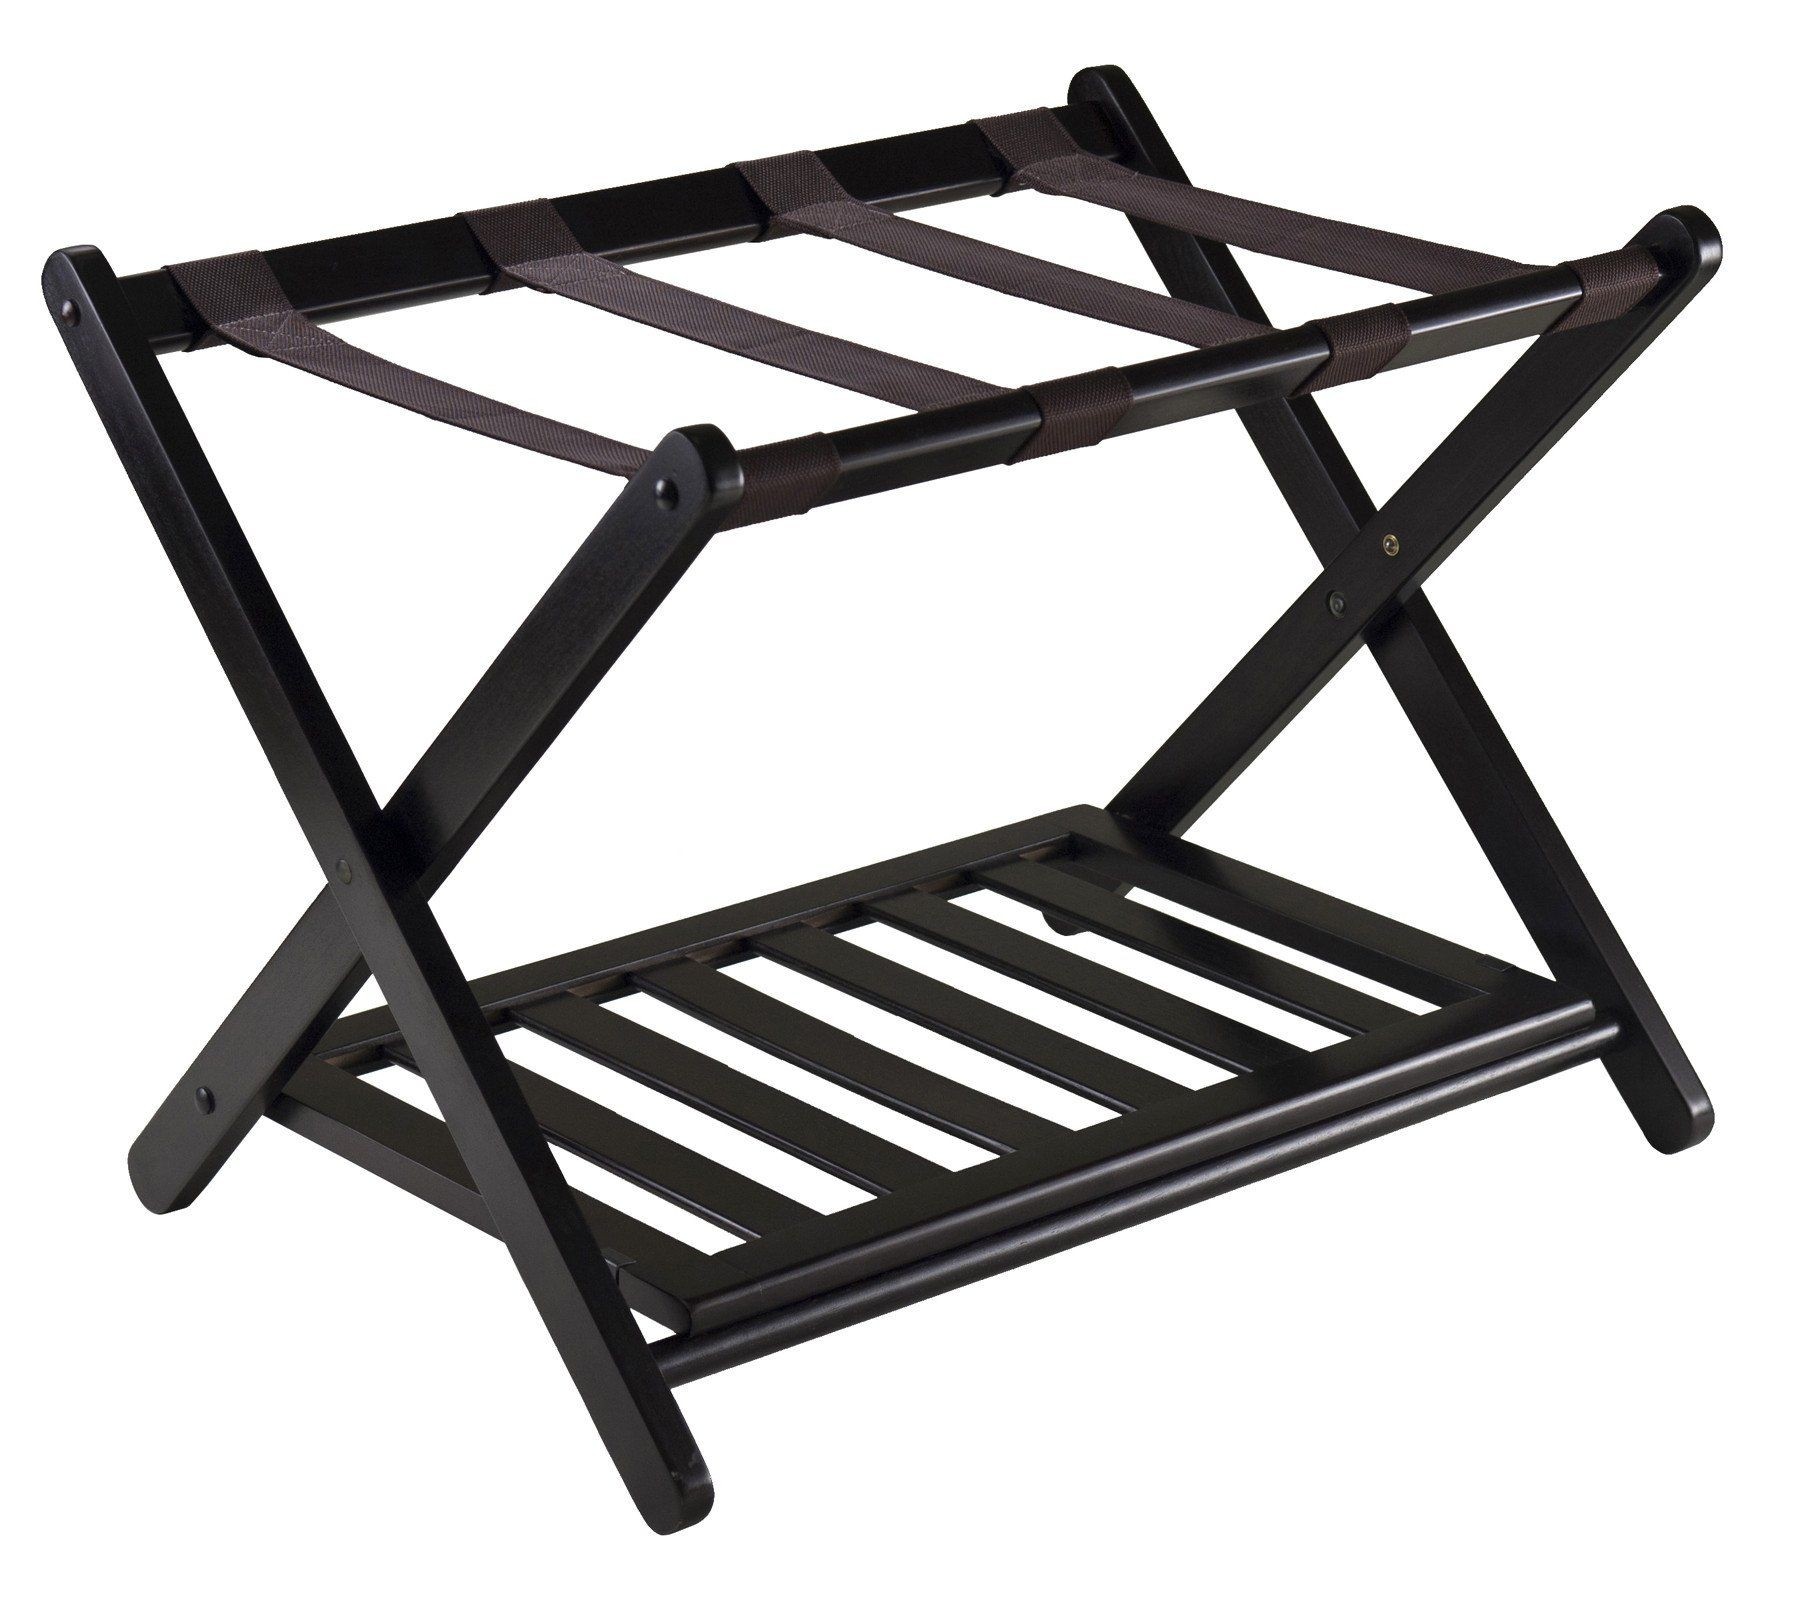 The overnight escape reese luggage rack